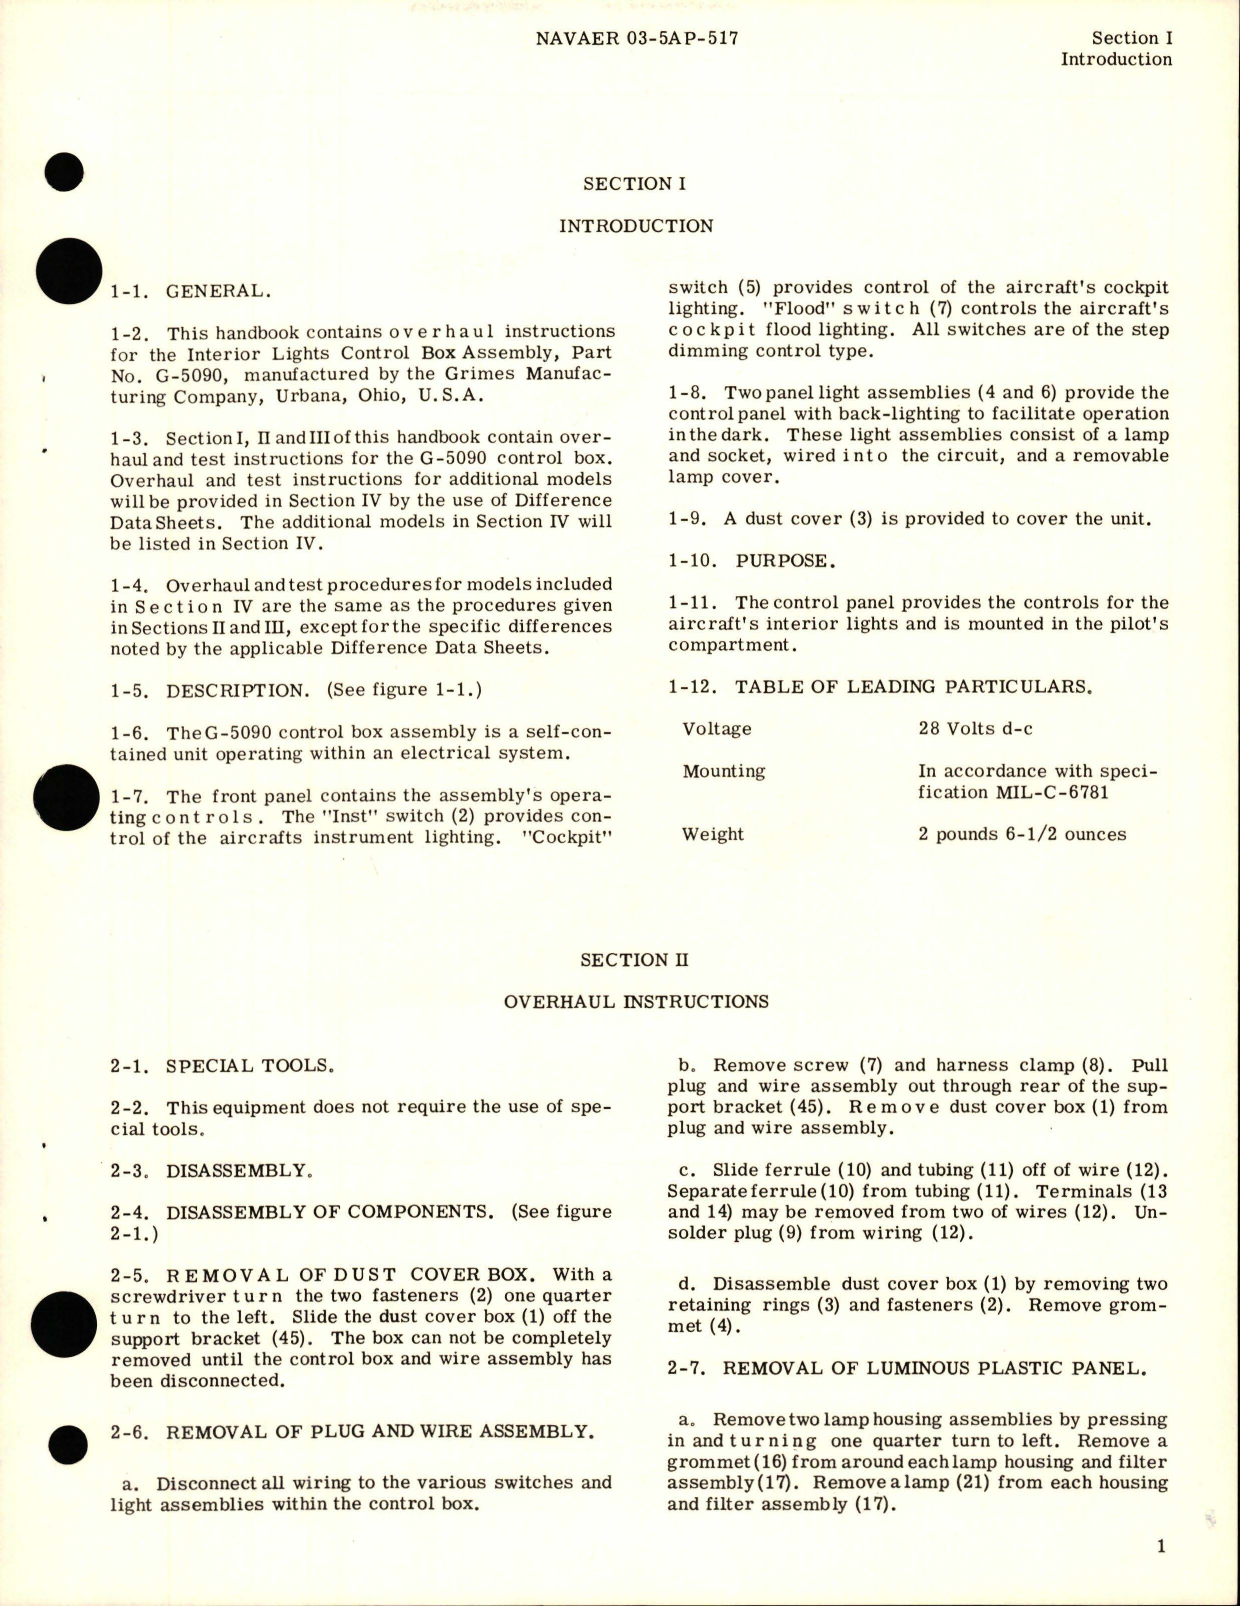 Sample page 5 from AirCorps Library document: Overhaul Instructions for Interior Light Control Box - Part G-5090 